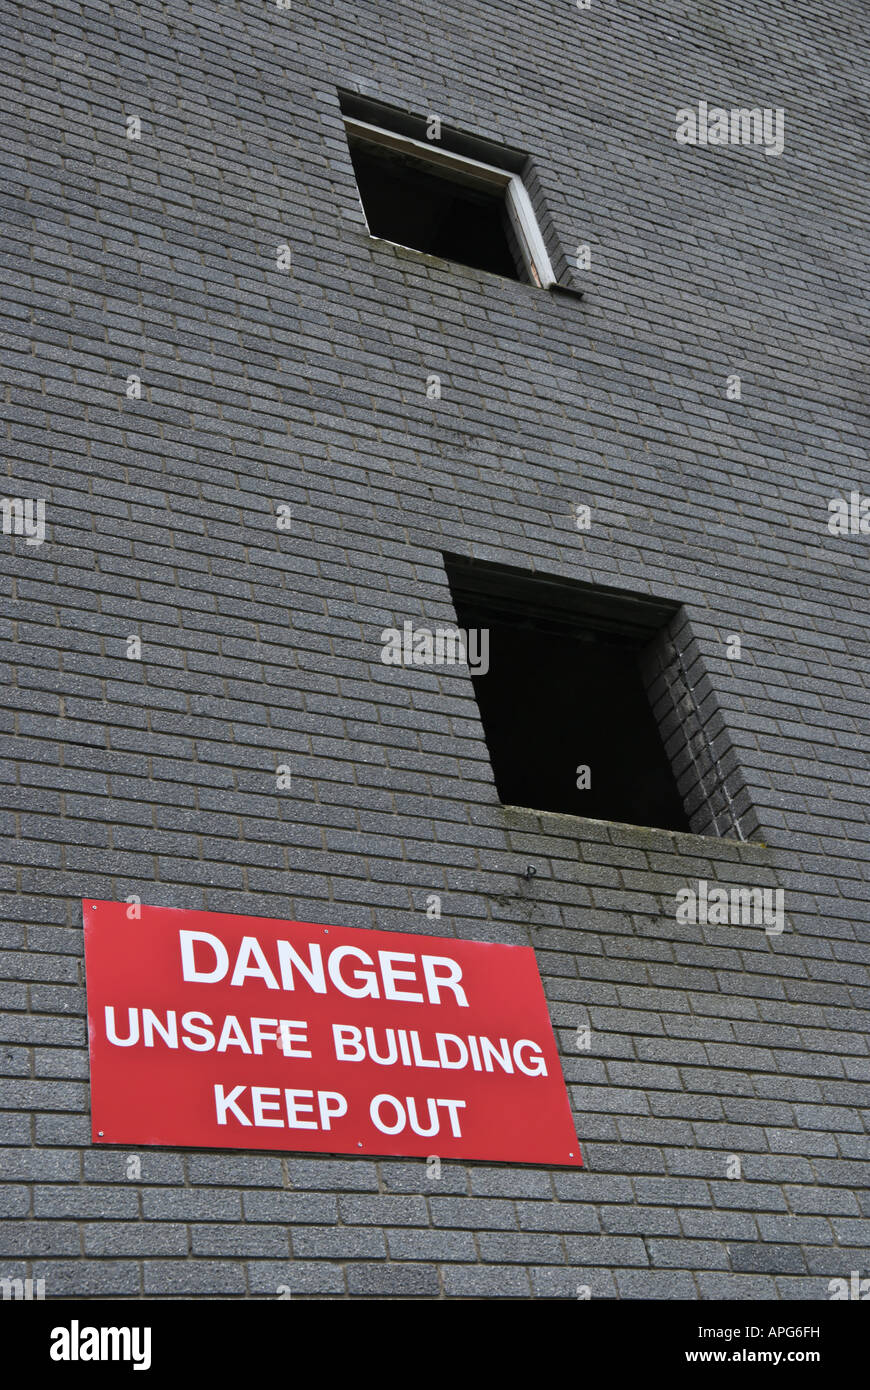 A derelict building with a warning sign 'Danger unsafe building keep out' Stock Photo